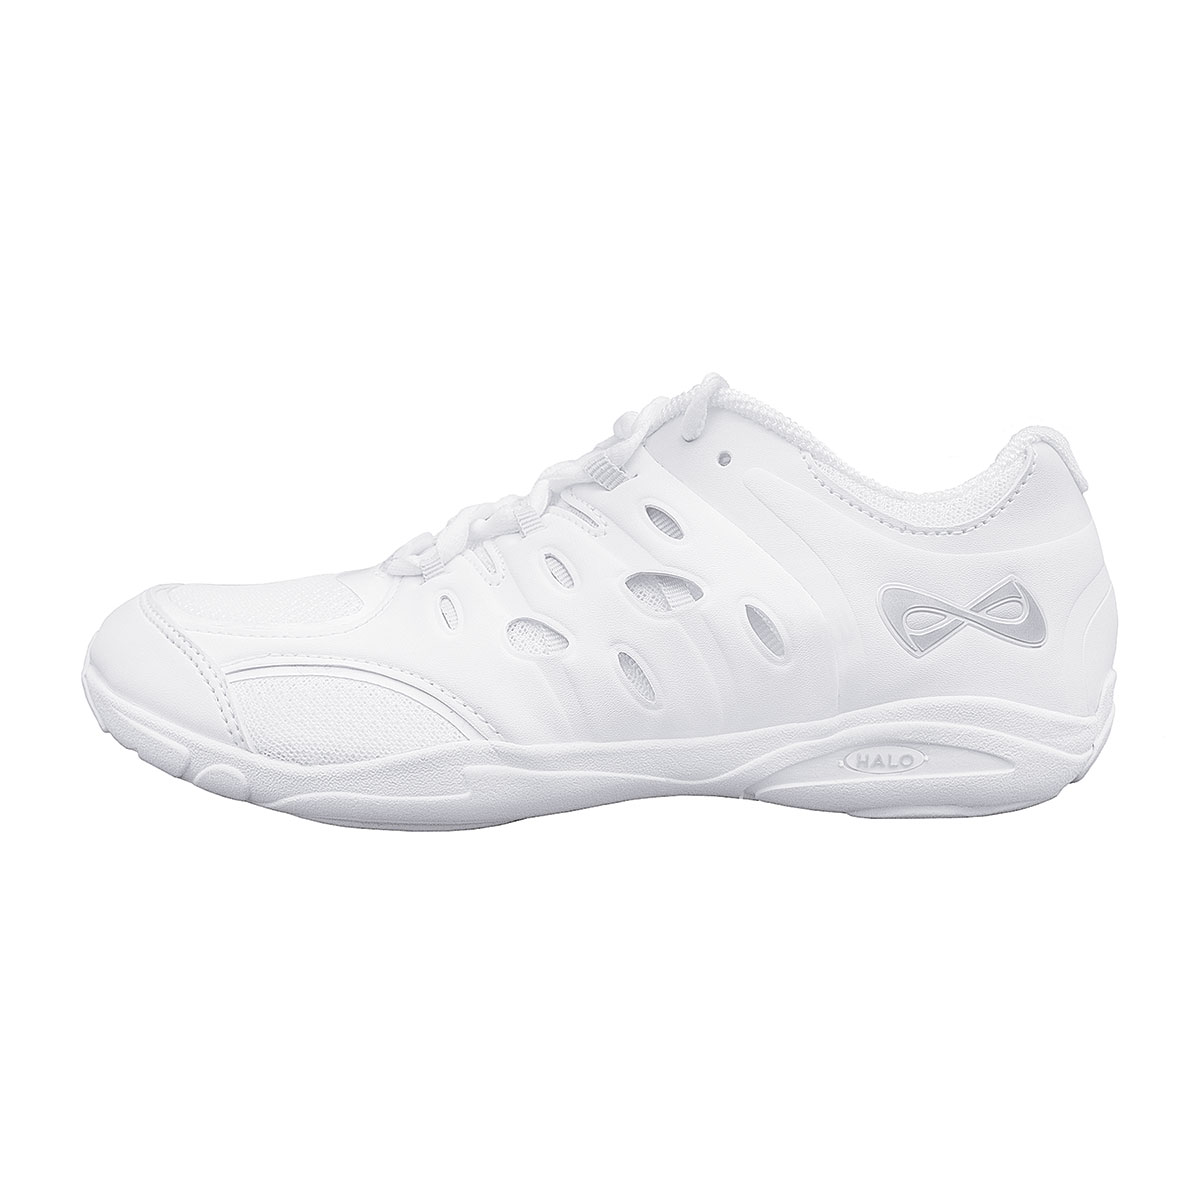 nfinity rival cheer shoes near me